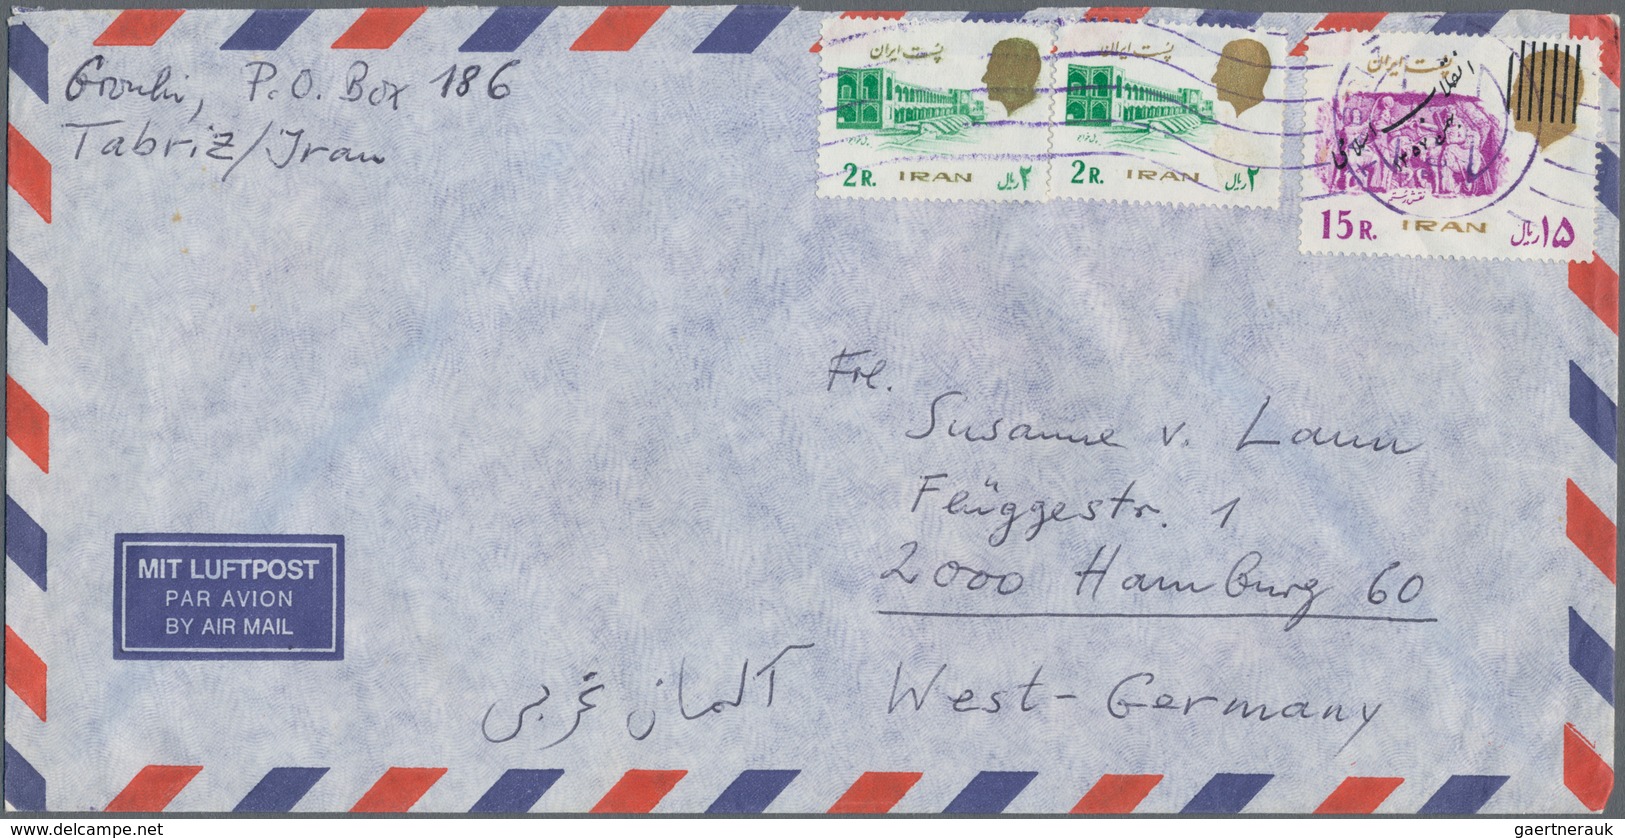 Iran: 1922-1985, 21 covers & cards including air mails, first flights Bouchir-Teheran & Meched-Teher